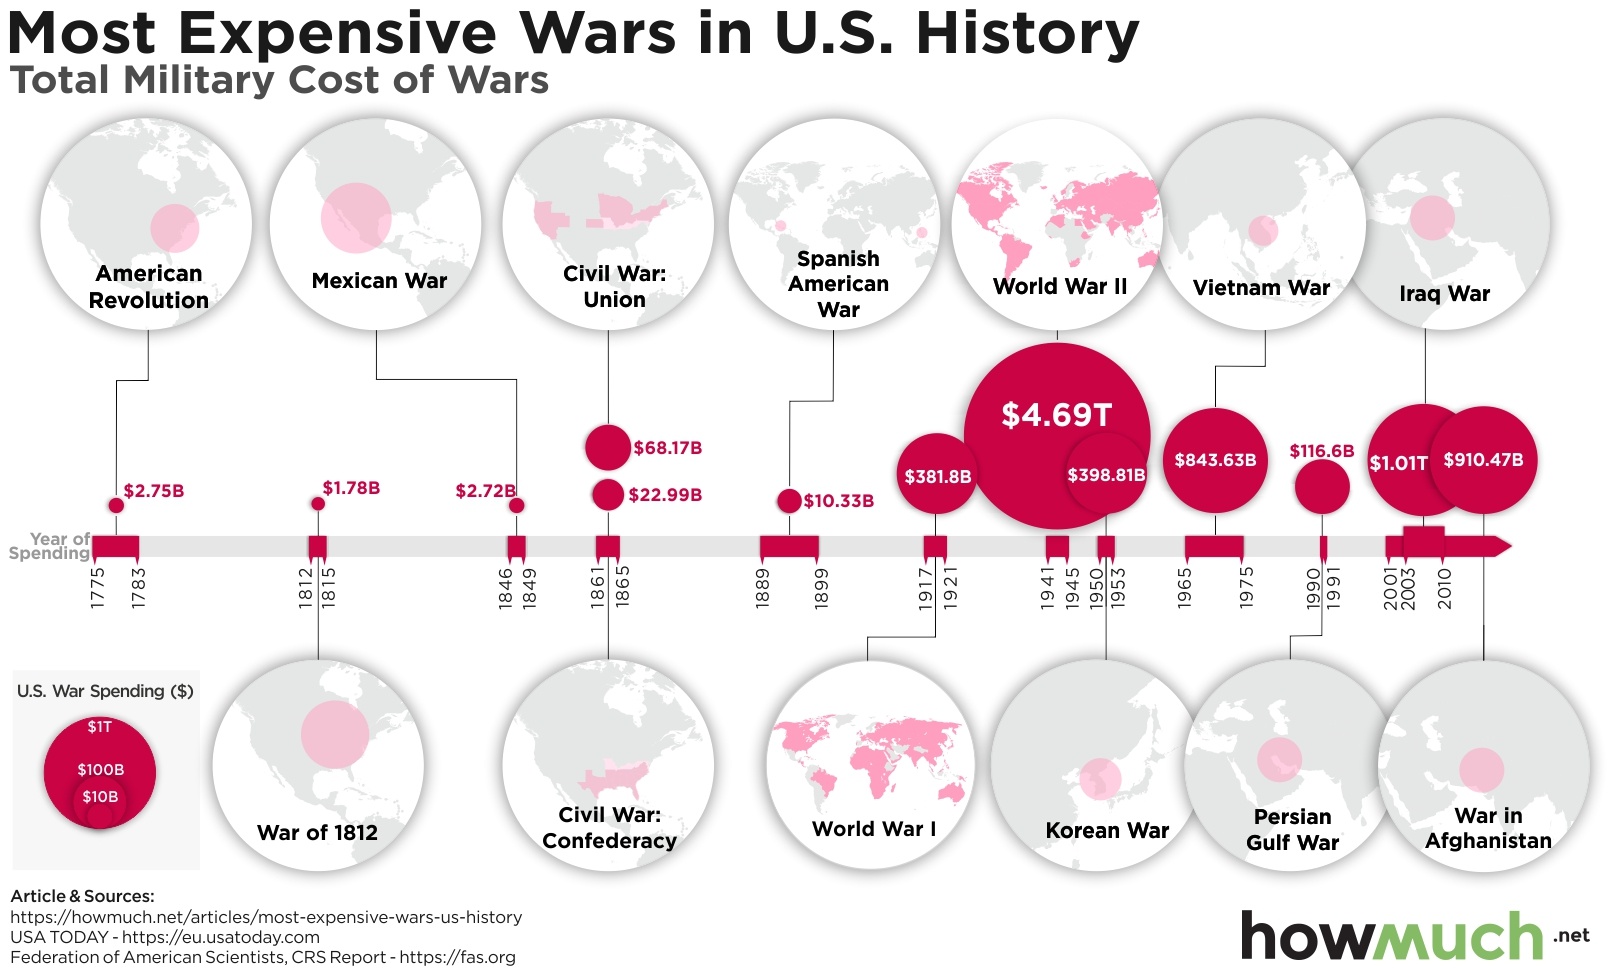 most-expensive-wars-us-history-6c18.jpg